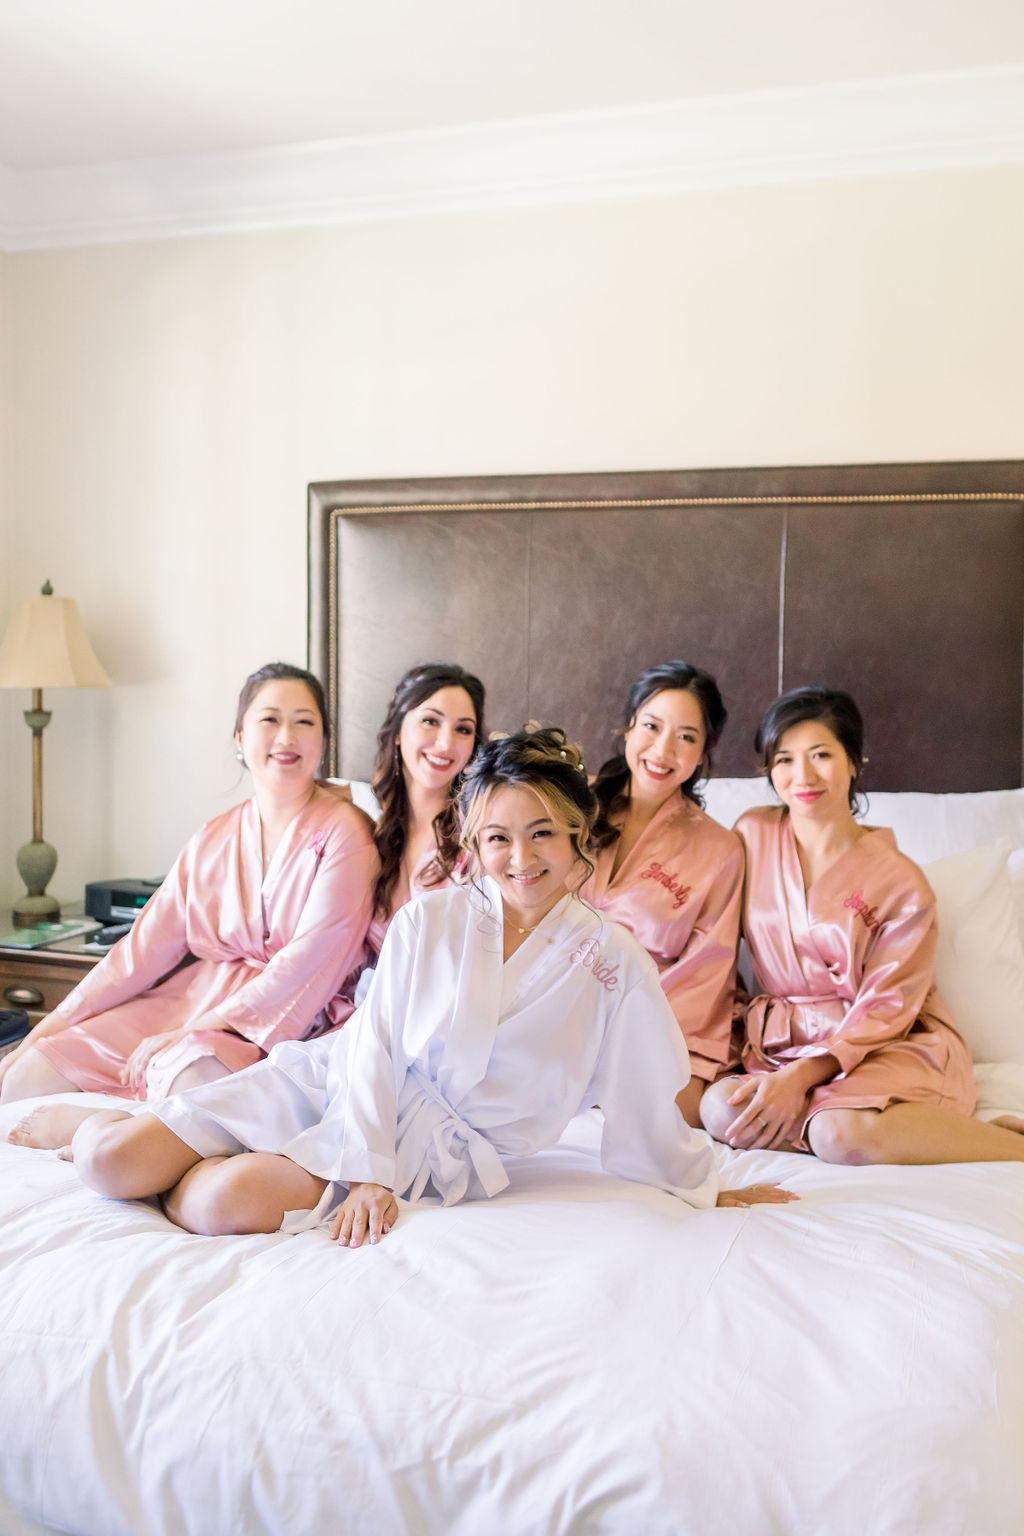 bride in white satin robe sits on bed with bridesmaids in personalized pink satin robes